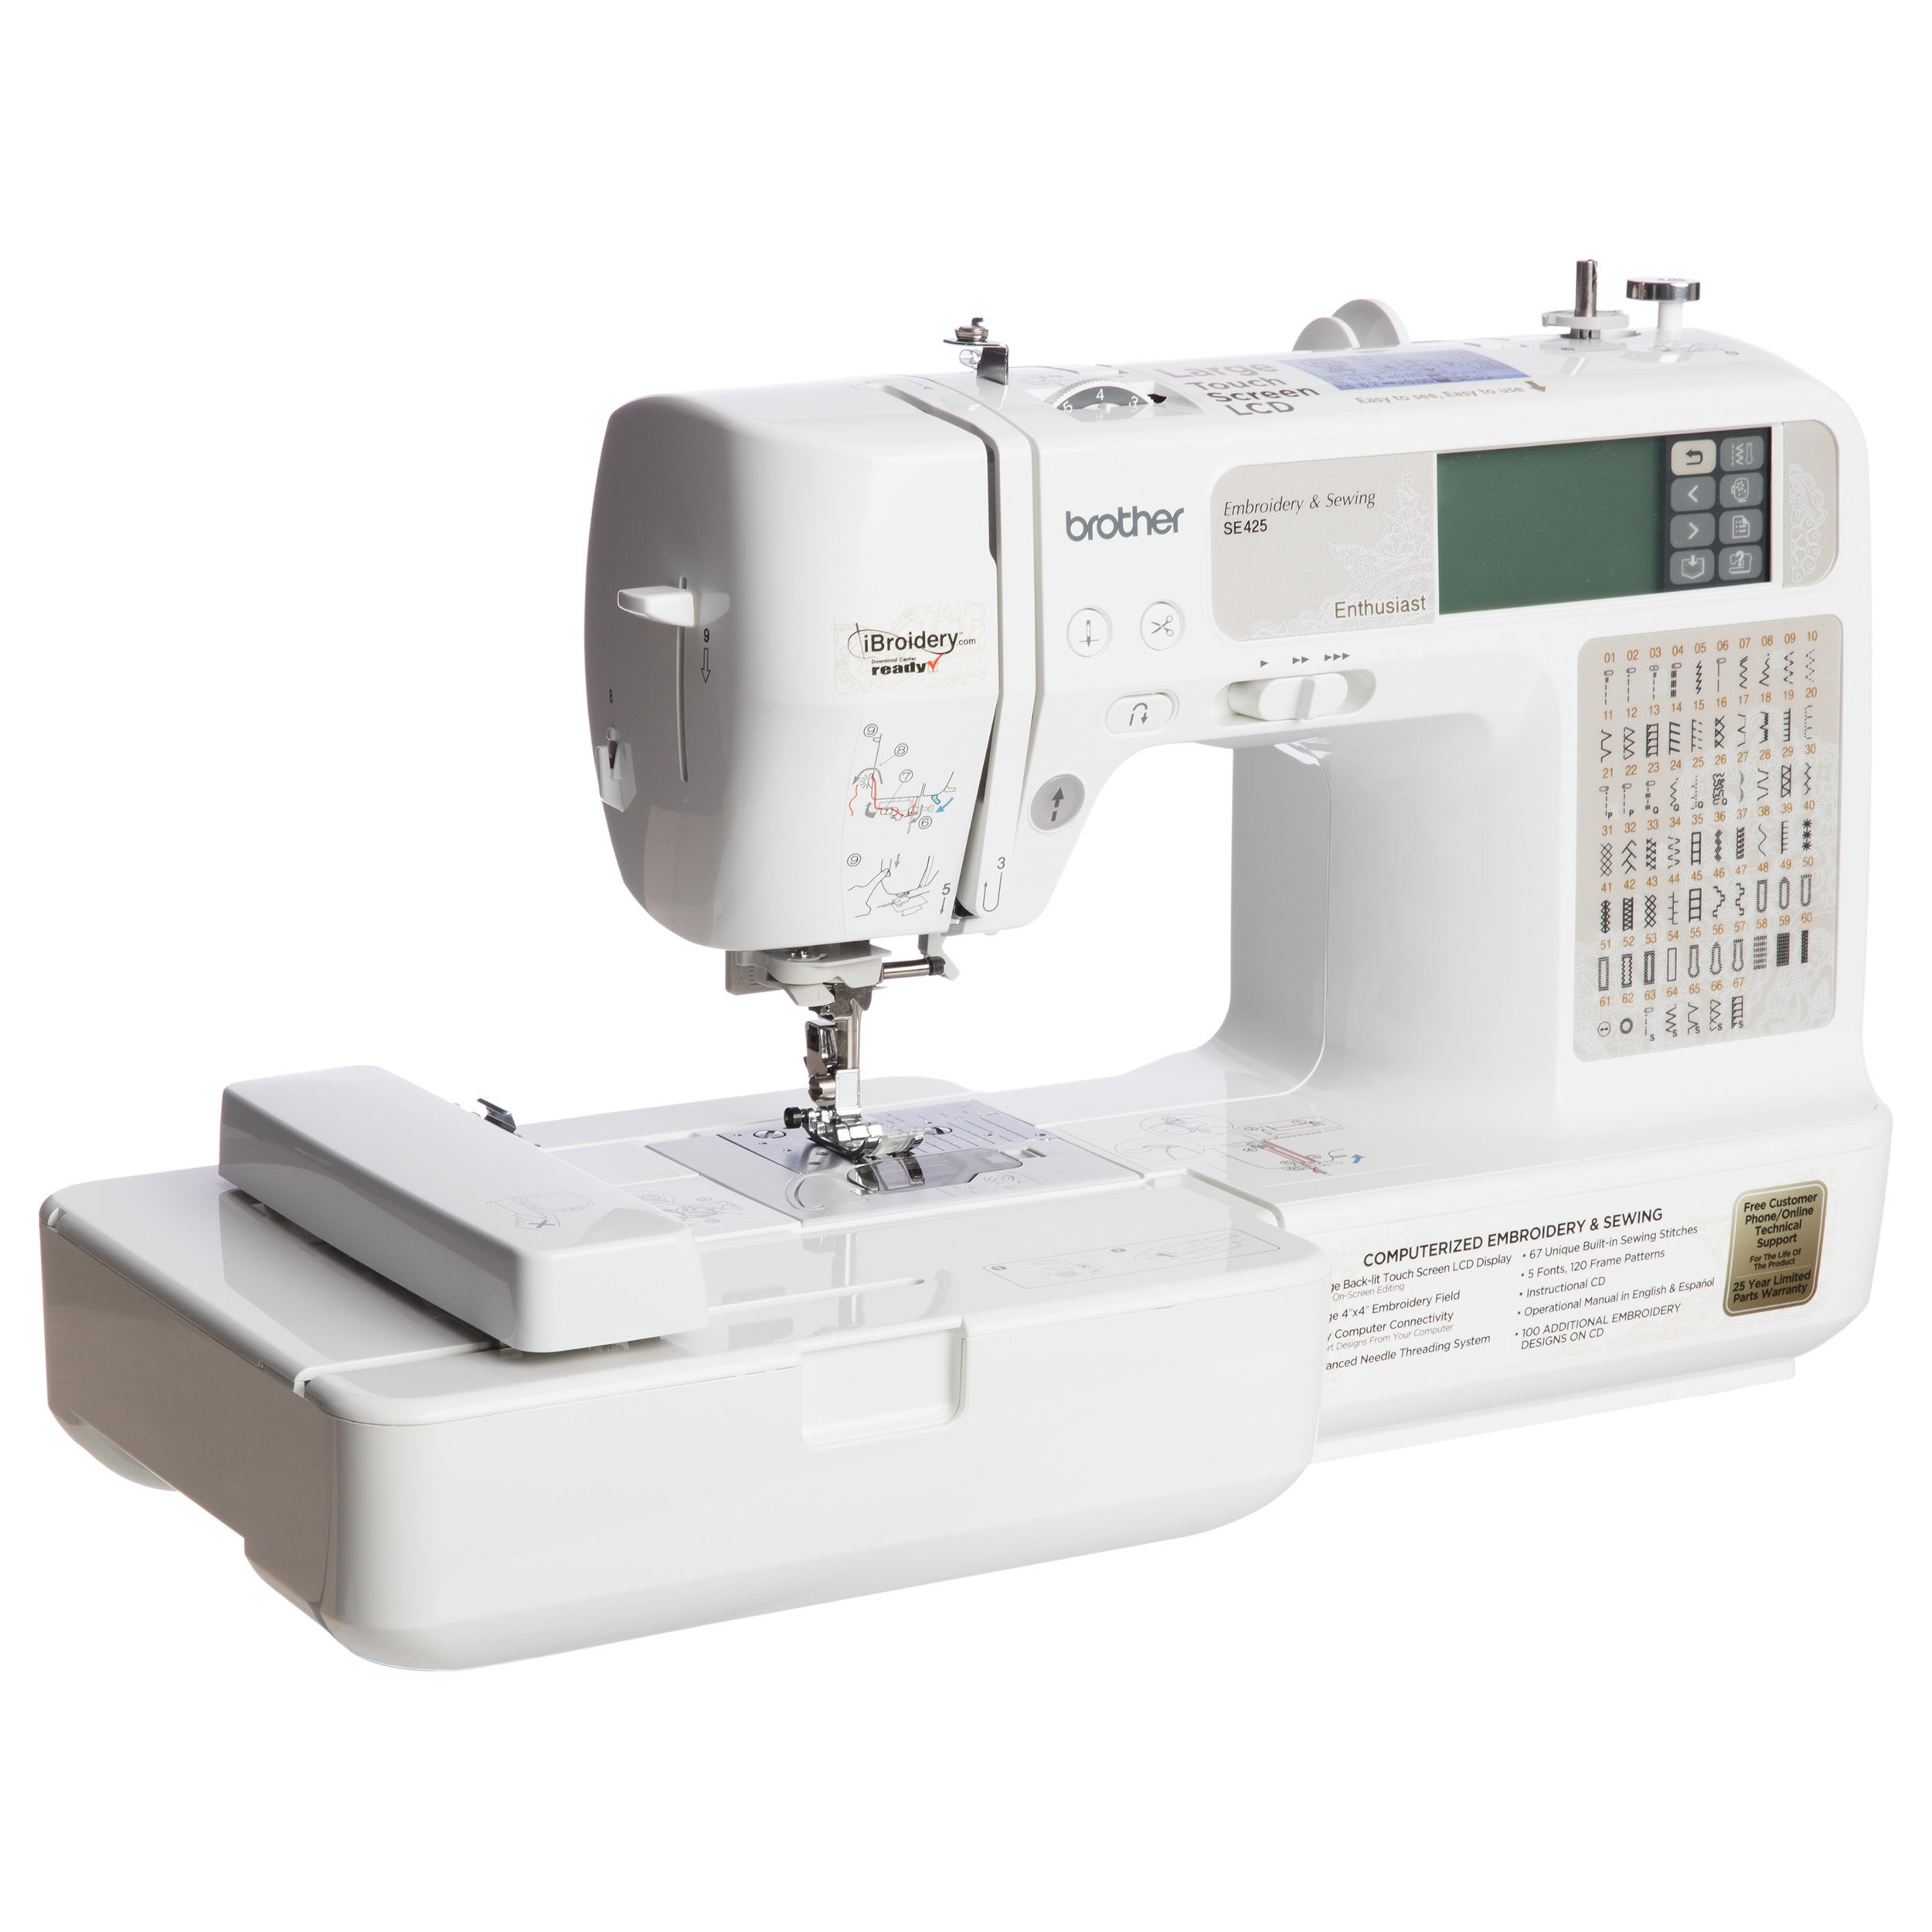 Free Brother Embroidery Patterns Brother Se425 Computerized Sewing And Embroidery Machine Factory Refurbished